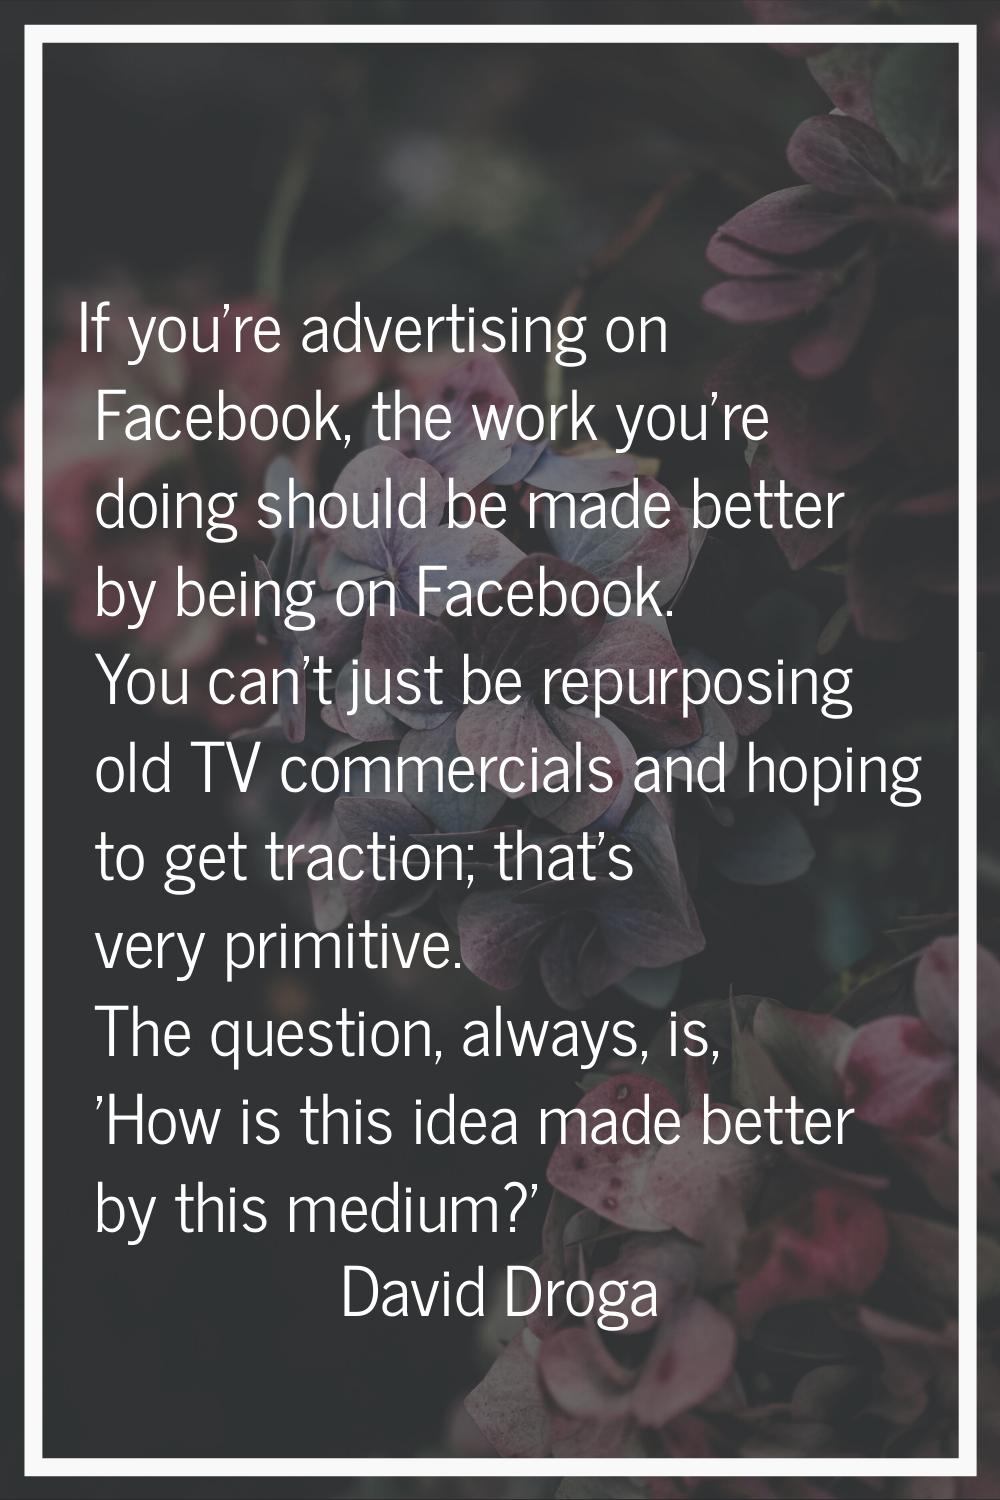 If you're advertising on Facebook, the work you're doing should be made better by being on Facebook